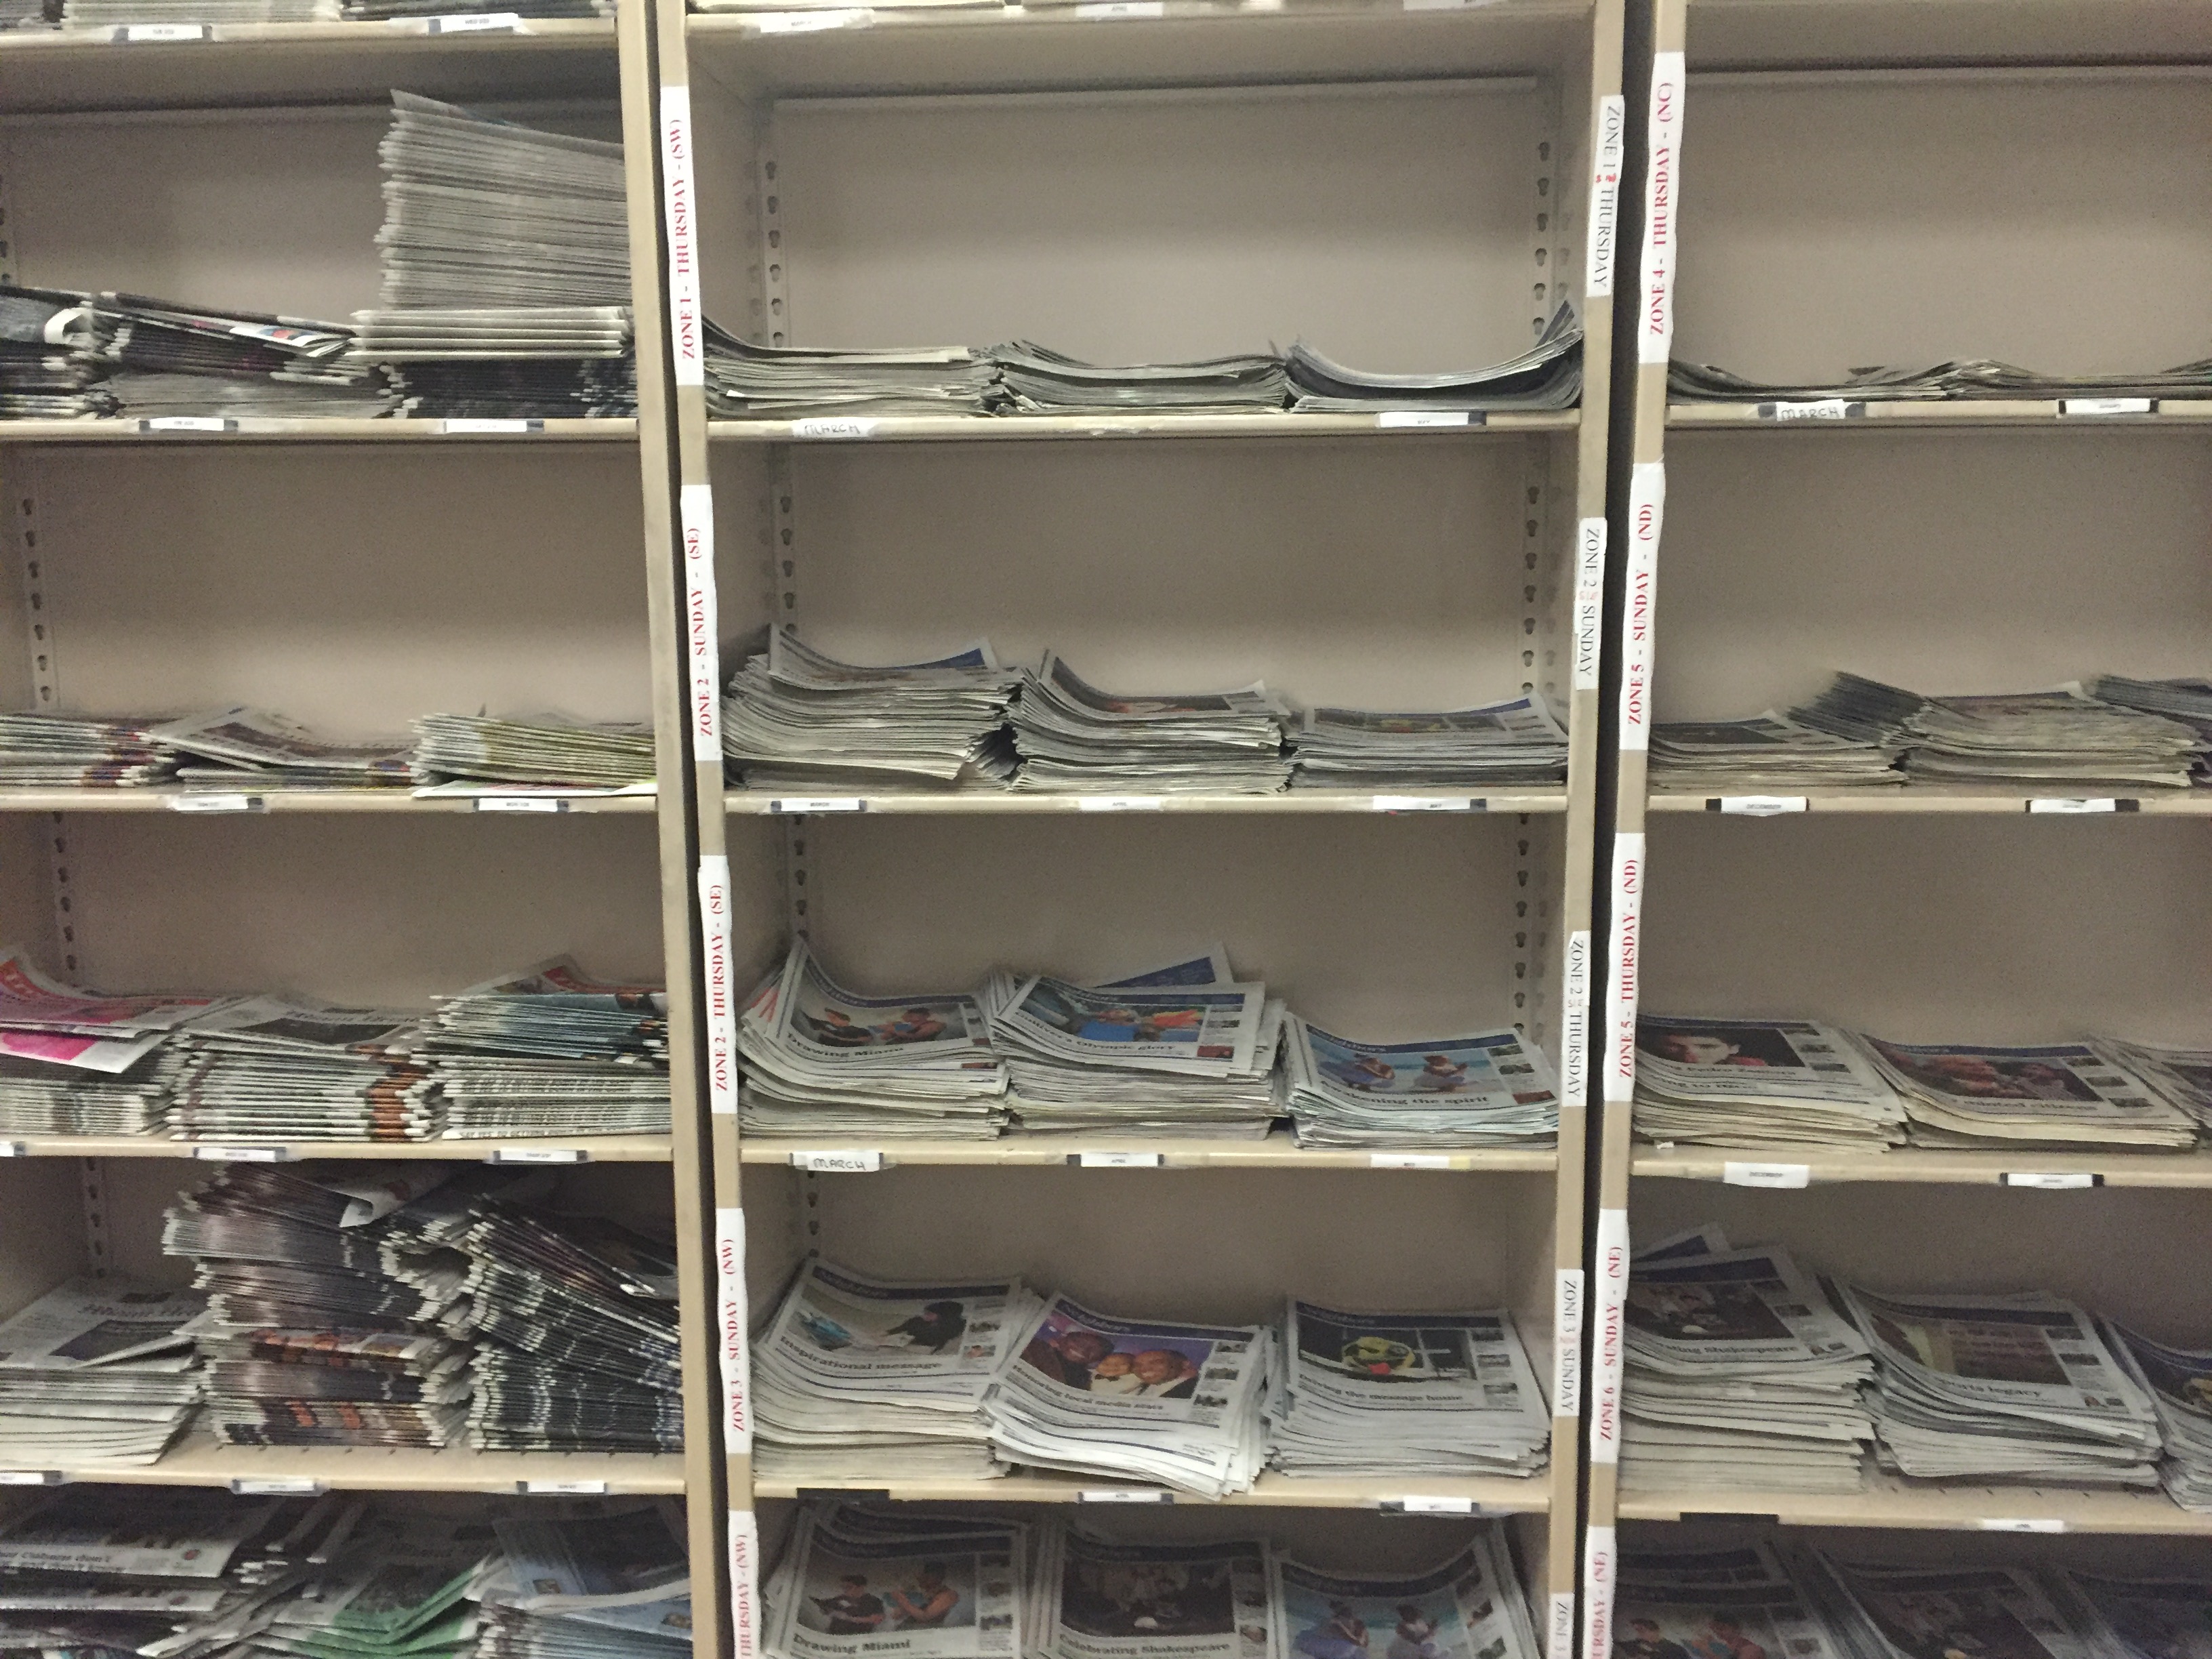 Archive papers from the Miami Herald. (Photo by Kristen Hare/Poynter)